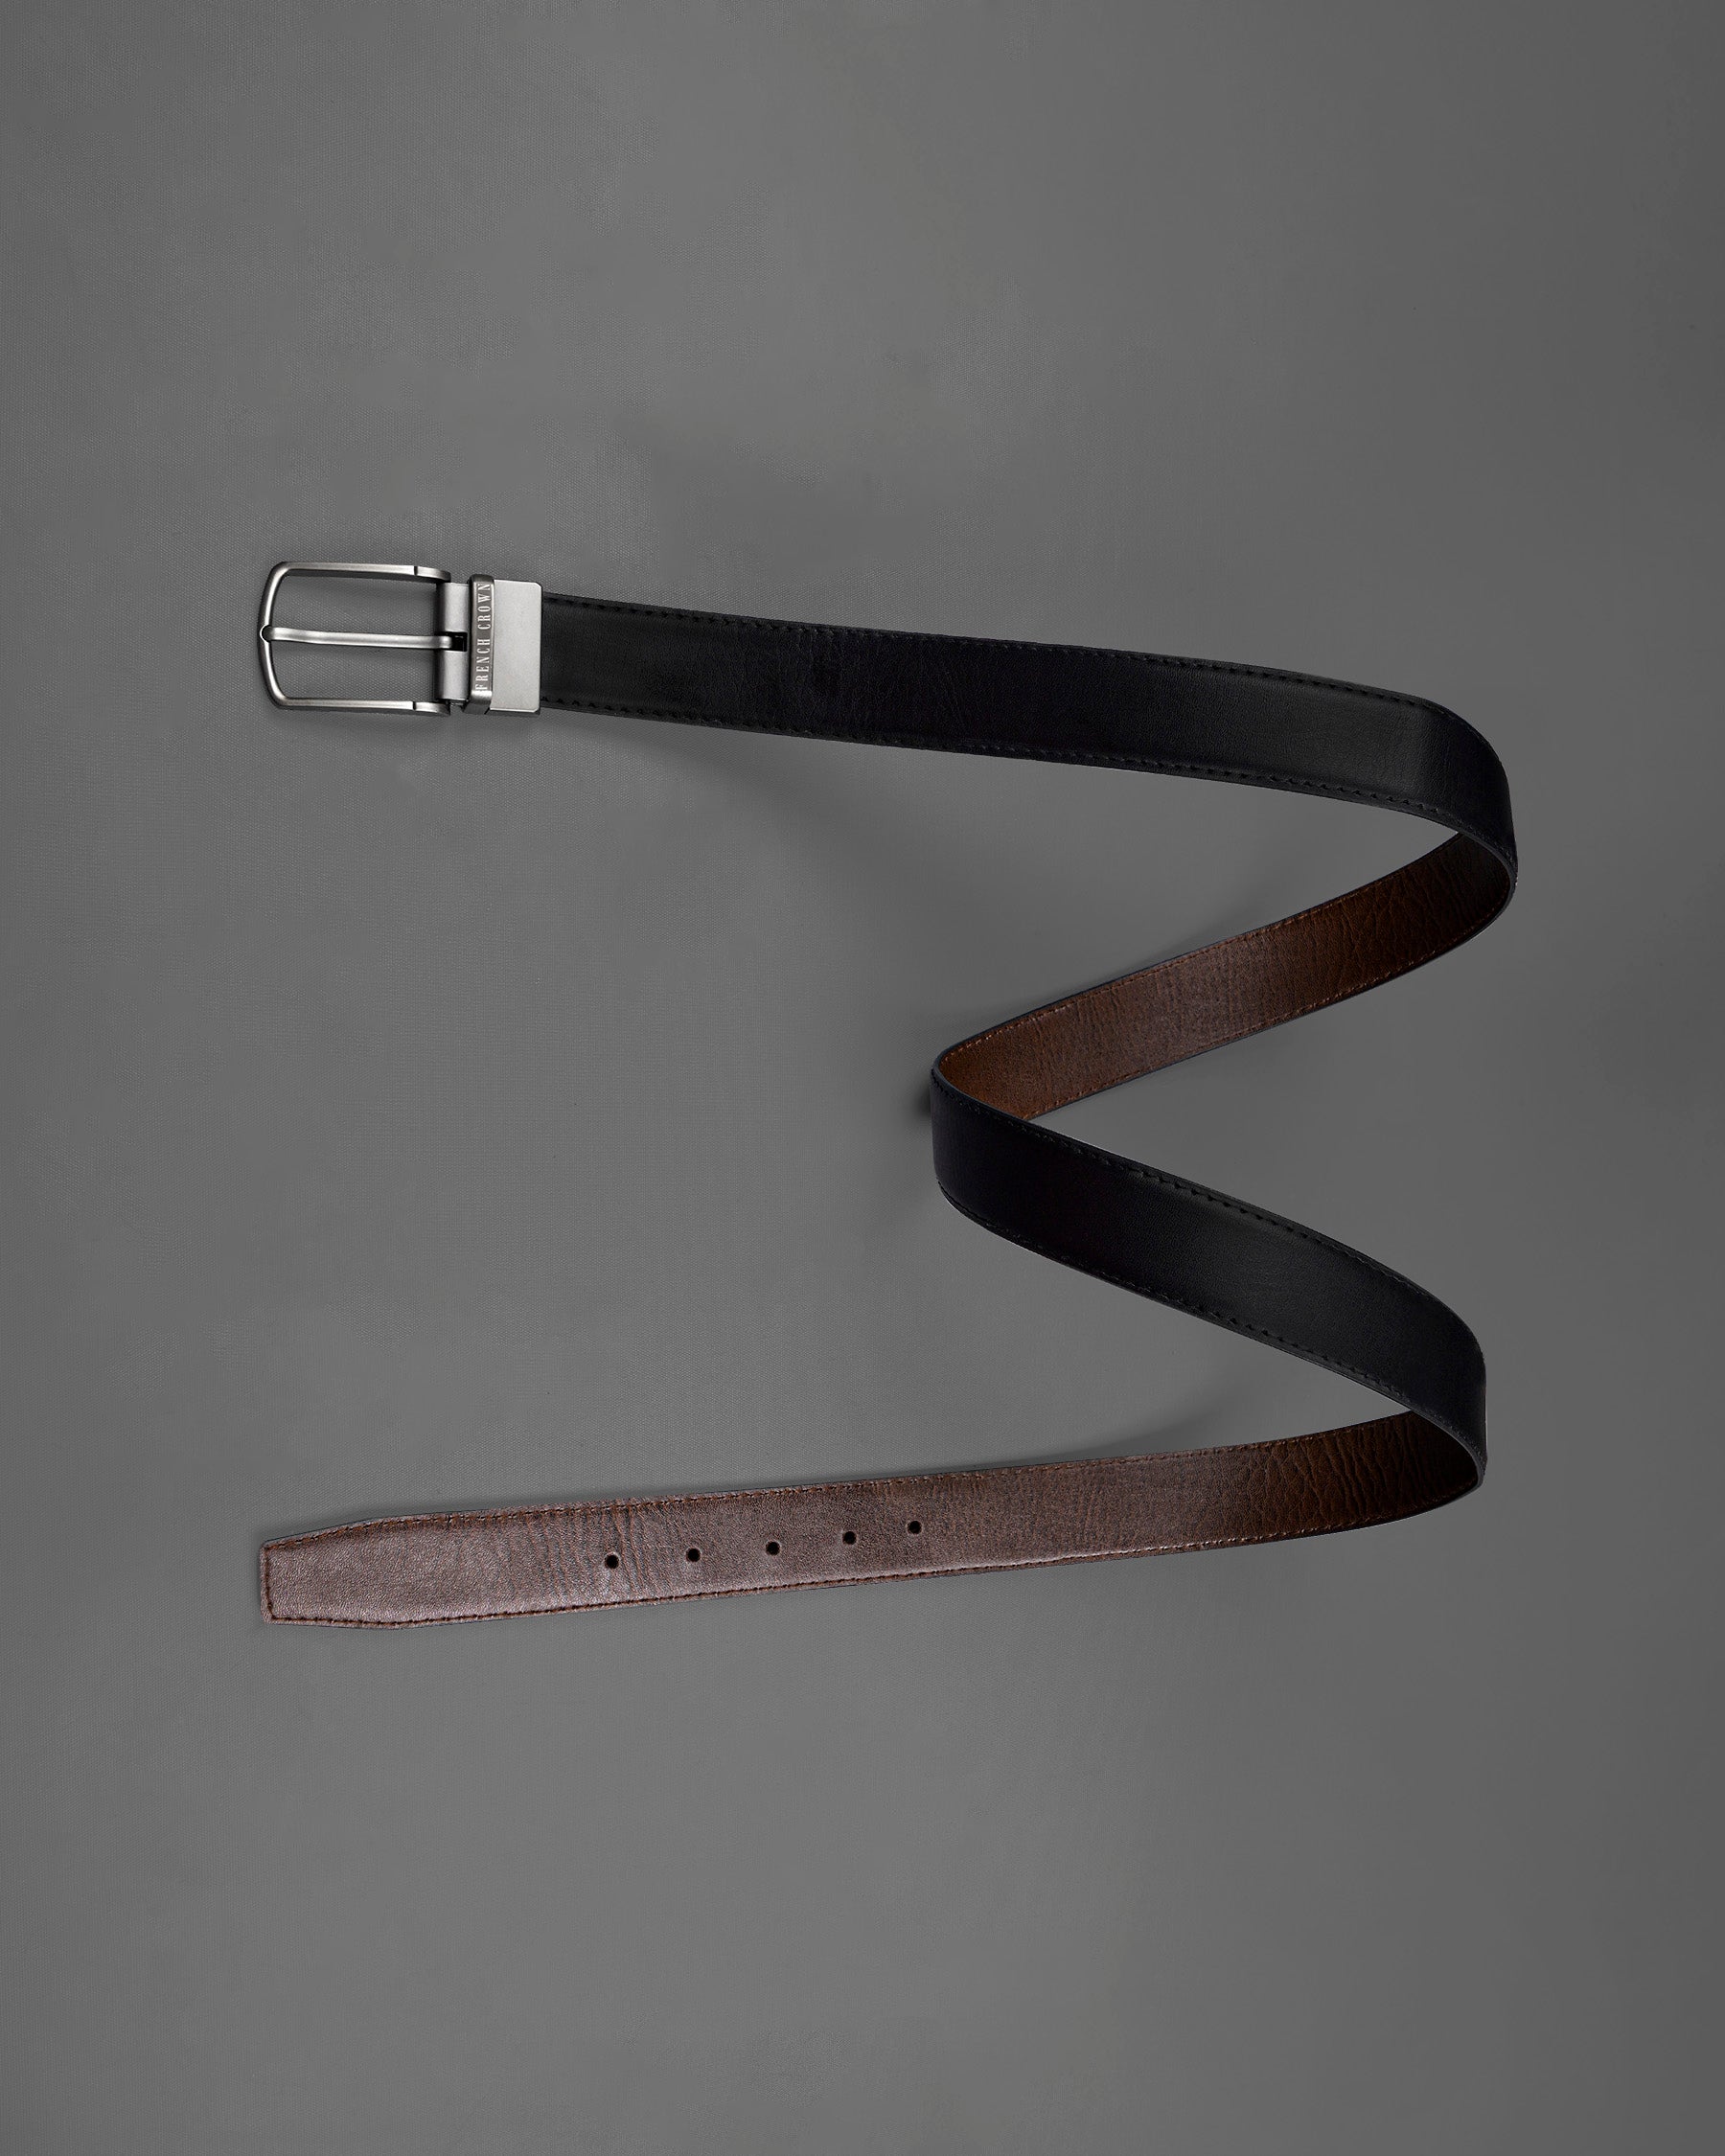 Silver Buckle with Jade Black and Brown Leather Free Handcrafted Reversible Belt  BT052-28, BT052-30, BT052-32, BT052-34, BT052-36, BT052-38 	